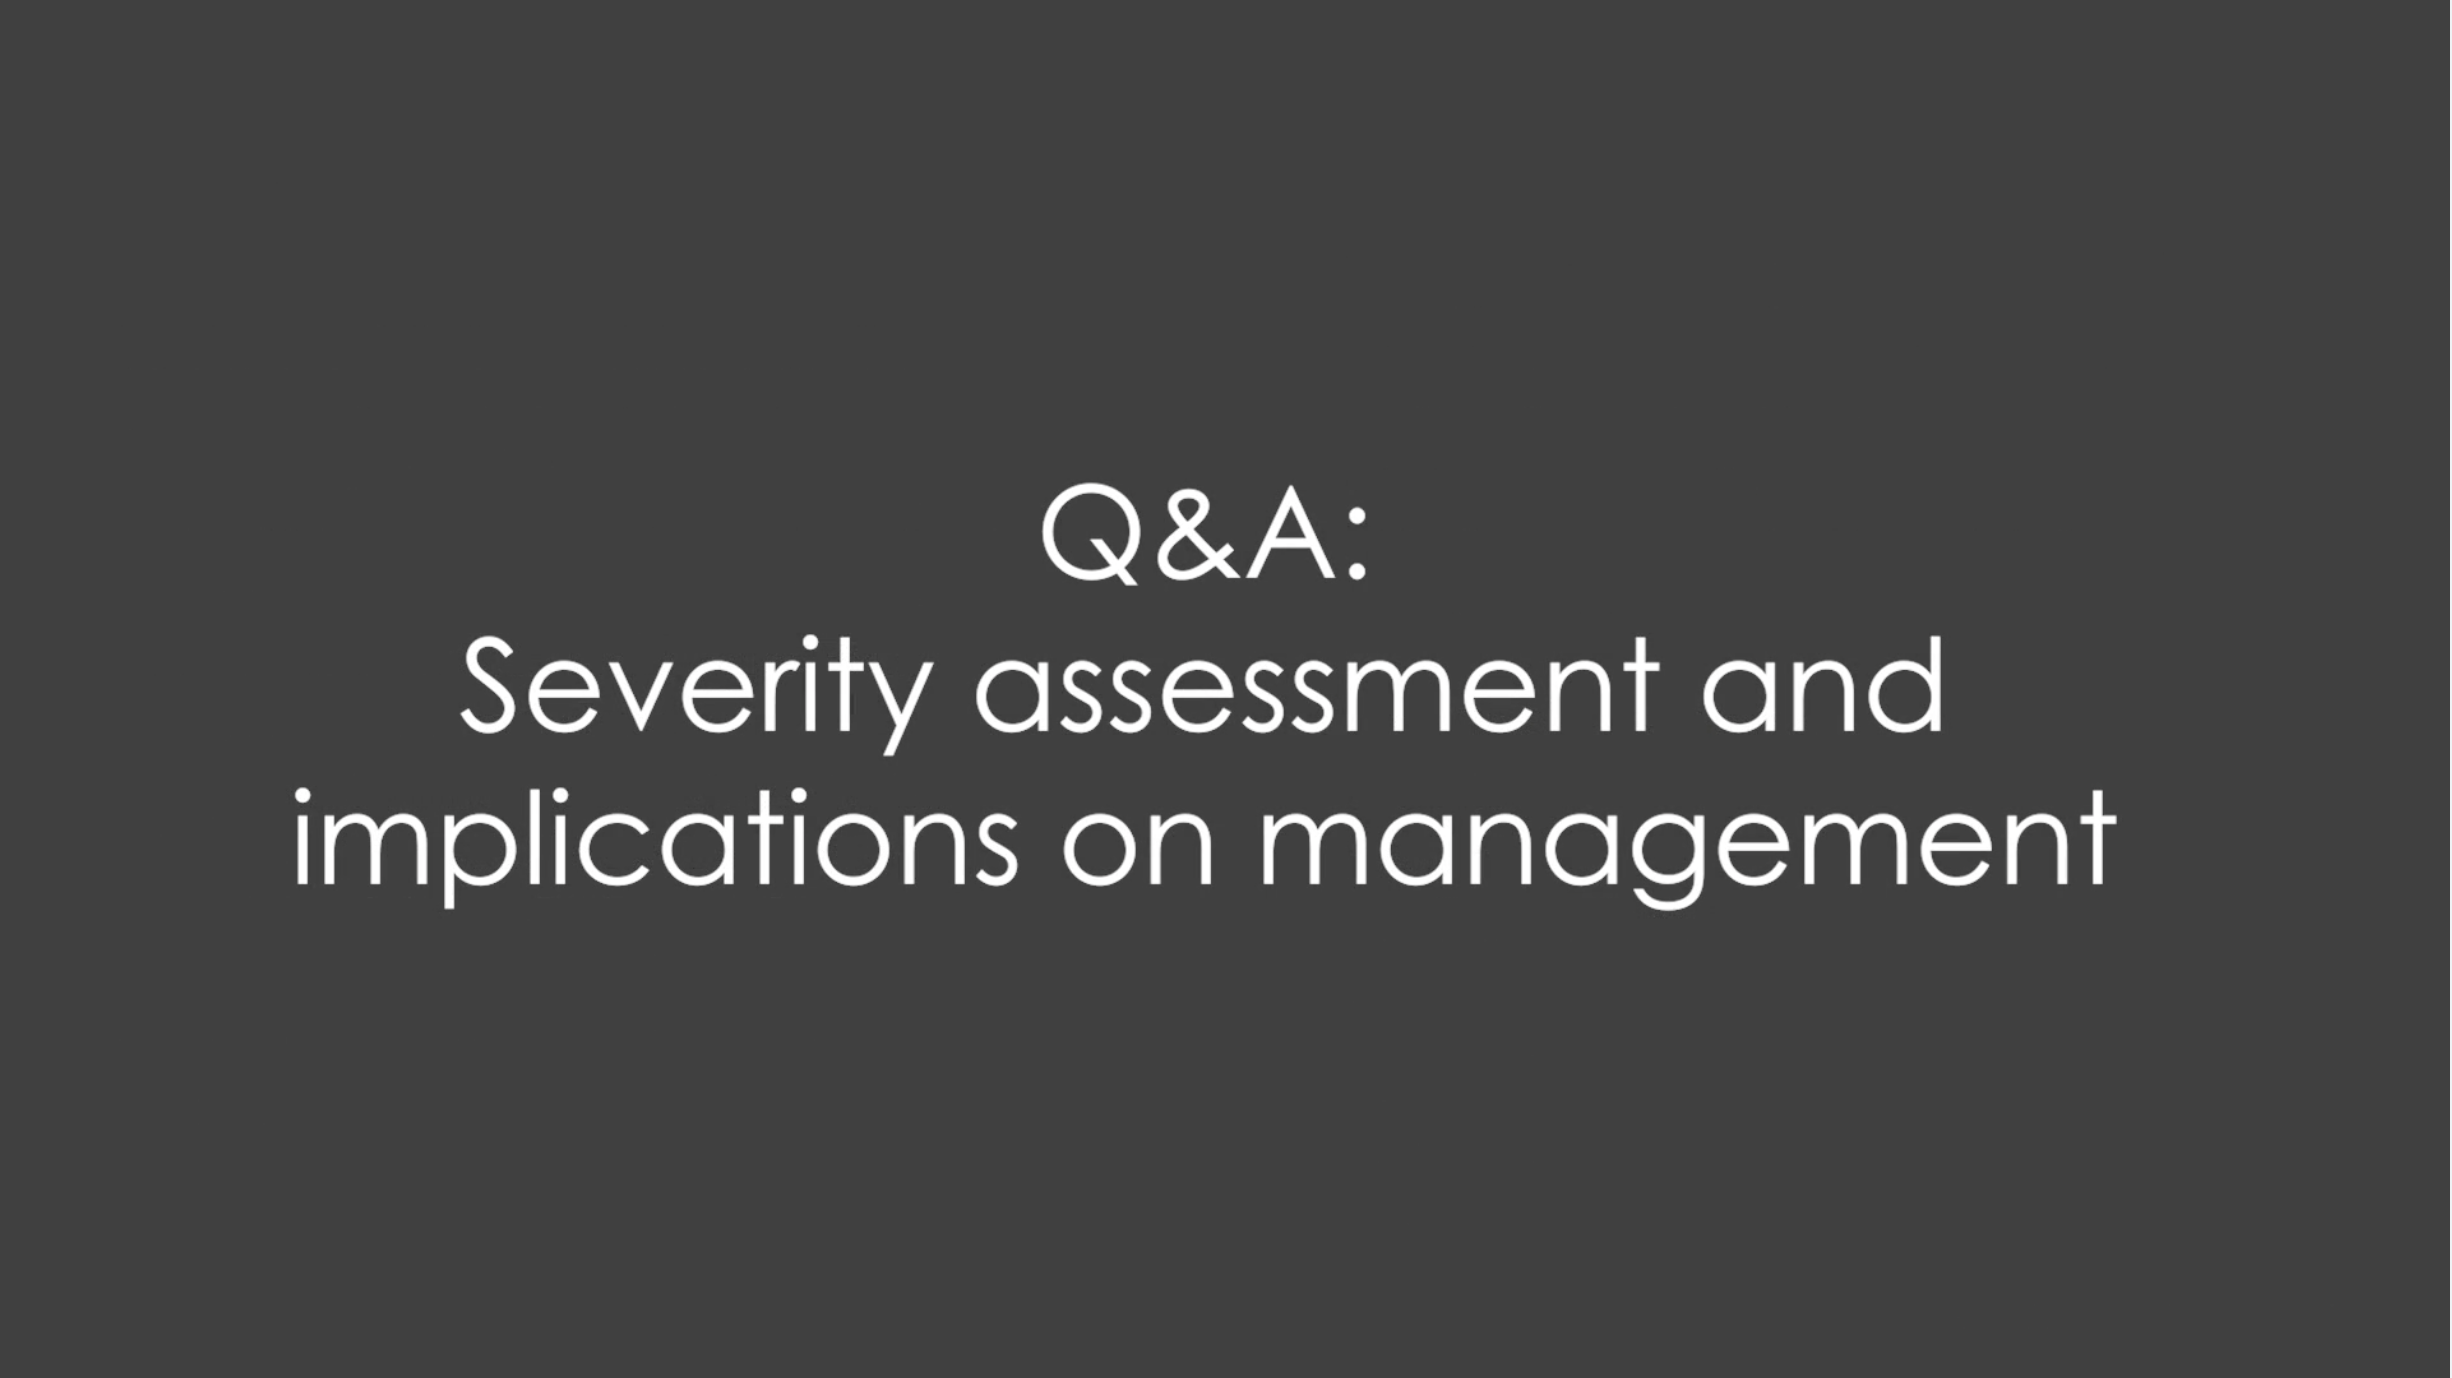 HS EADV 2022 - Q&A Severity assessment and implications on management